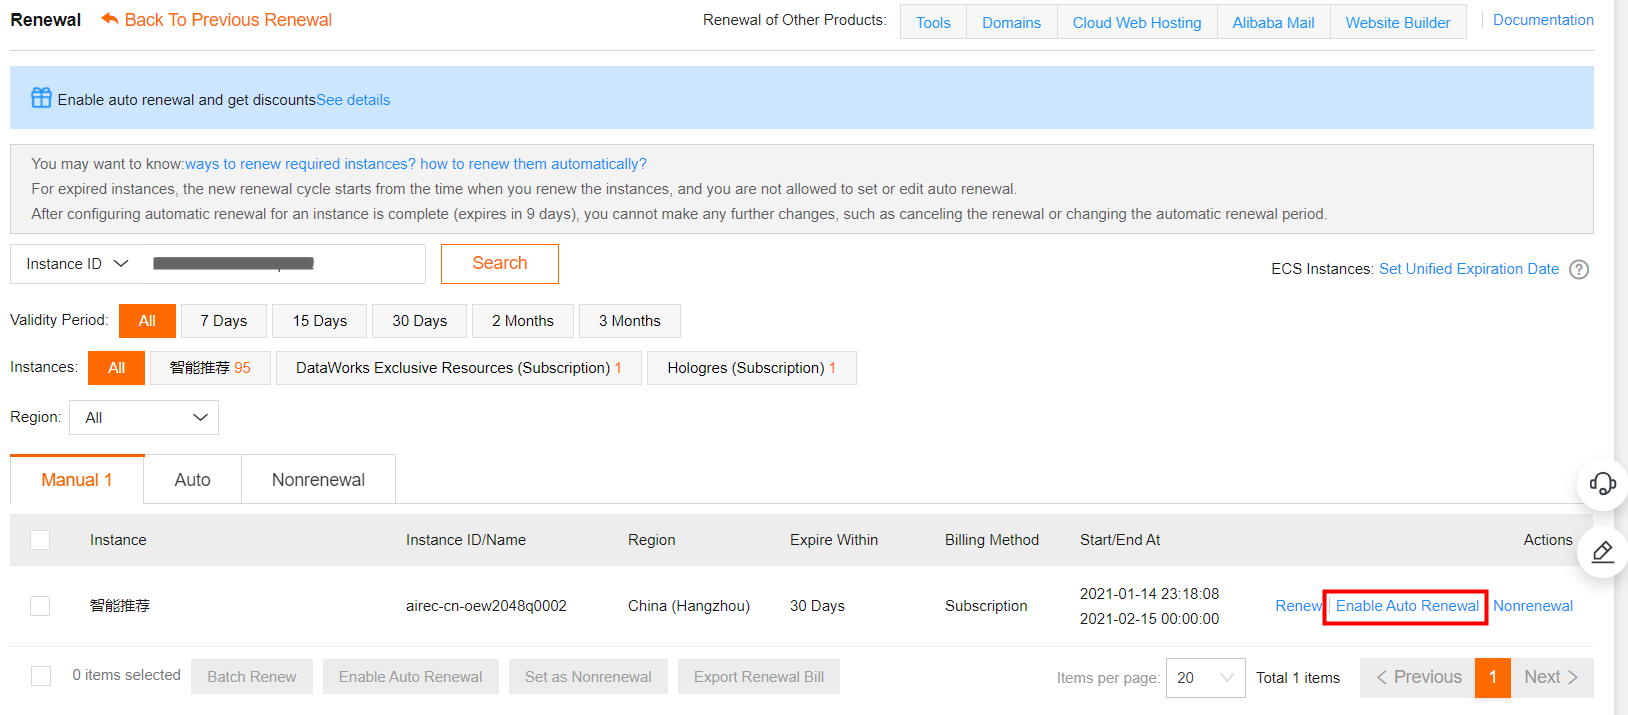 3. Enable auto-renewal after you purchase an AIRec instance